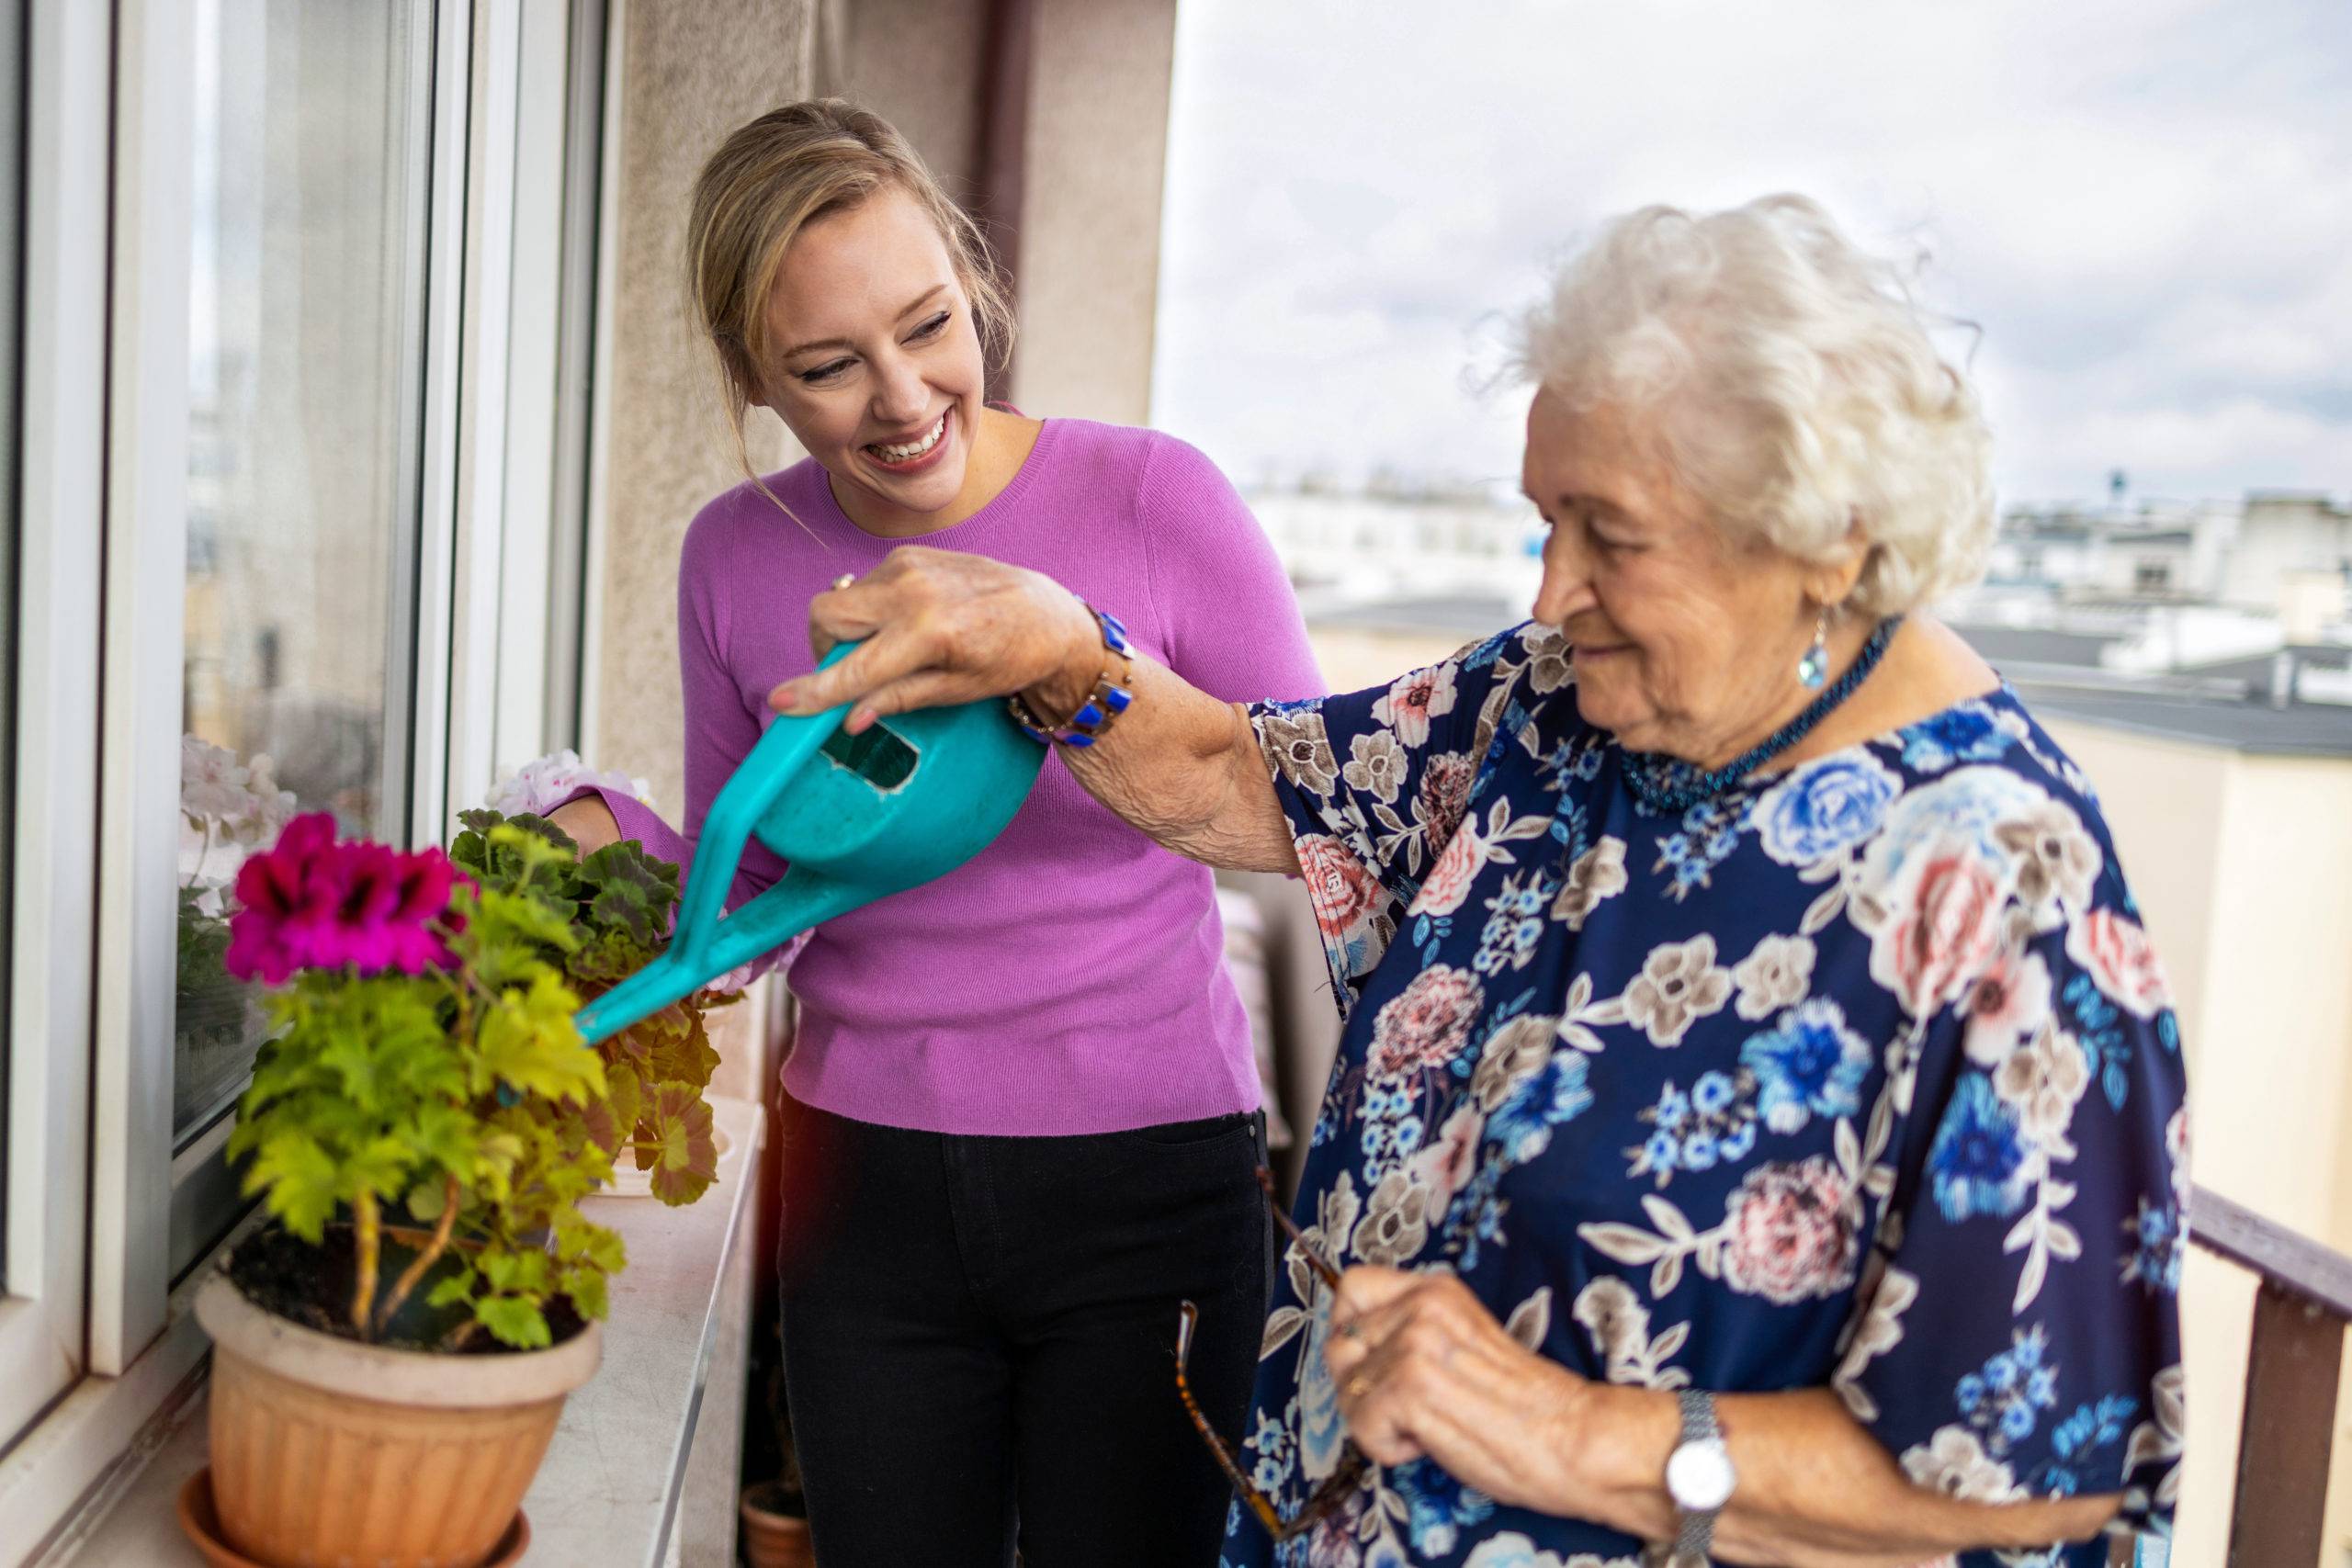 Elderly woman waters plants on balcony, young woman smiling next to her